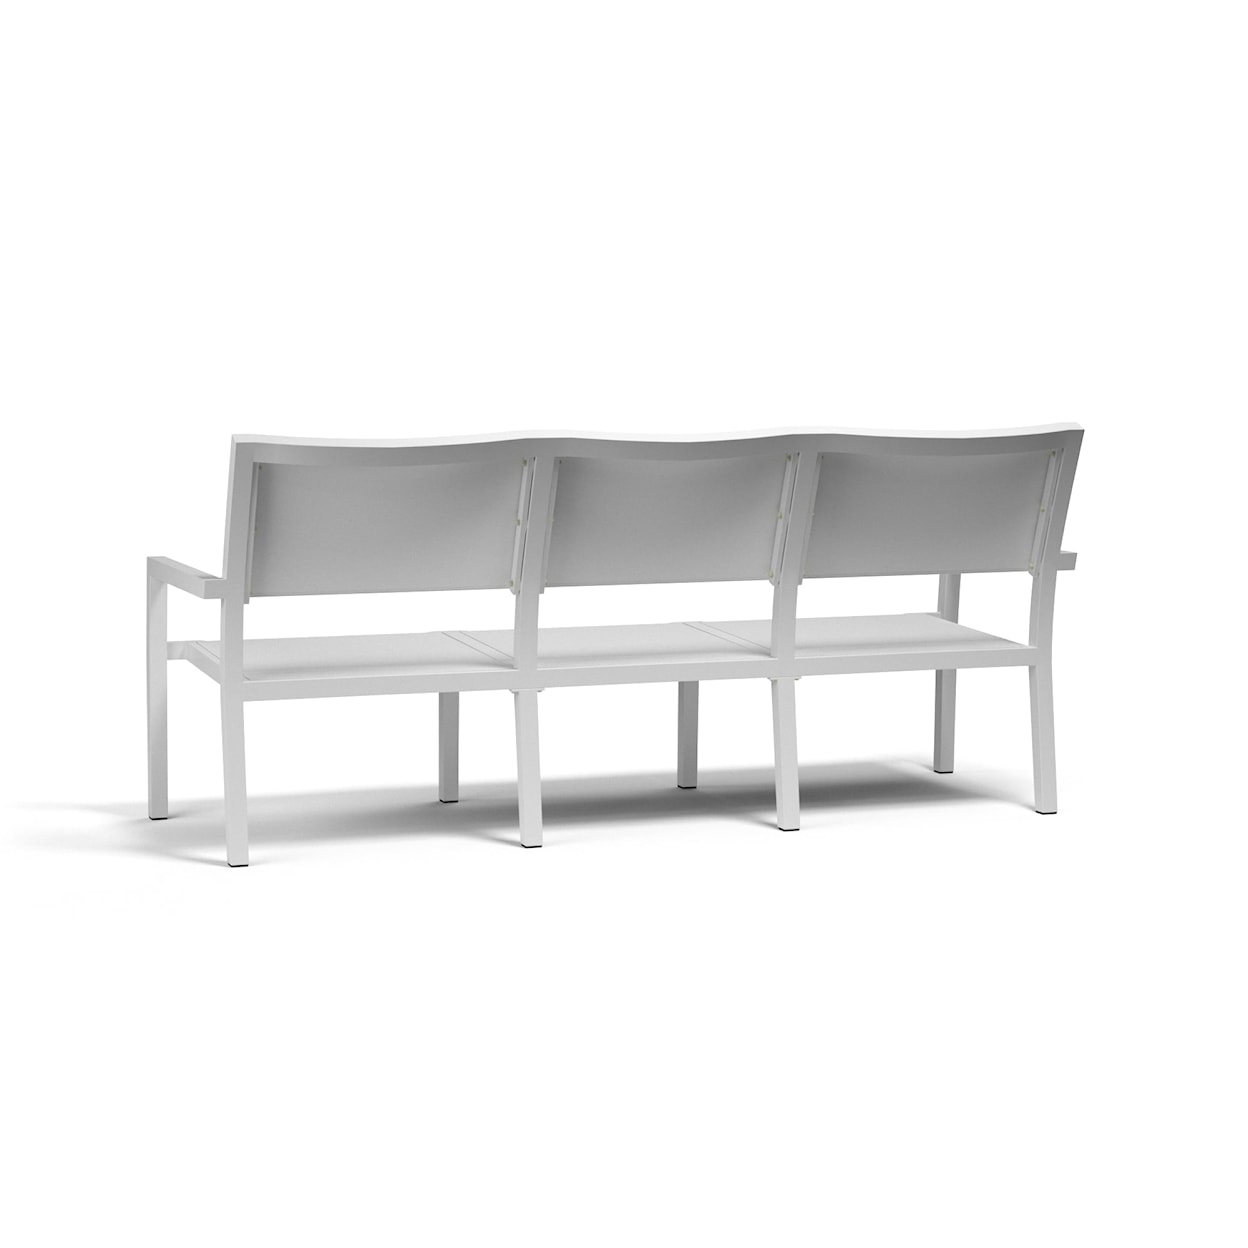 Sunset West Naples Outdoor Sling Sofa